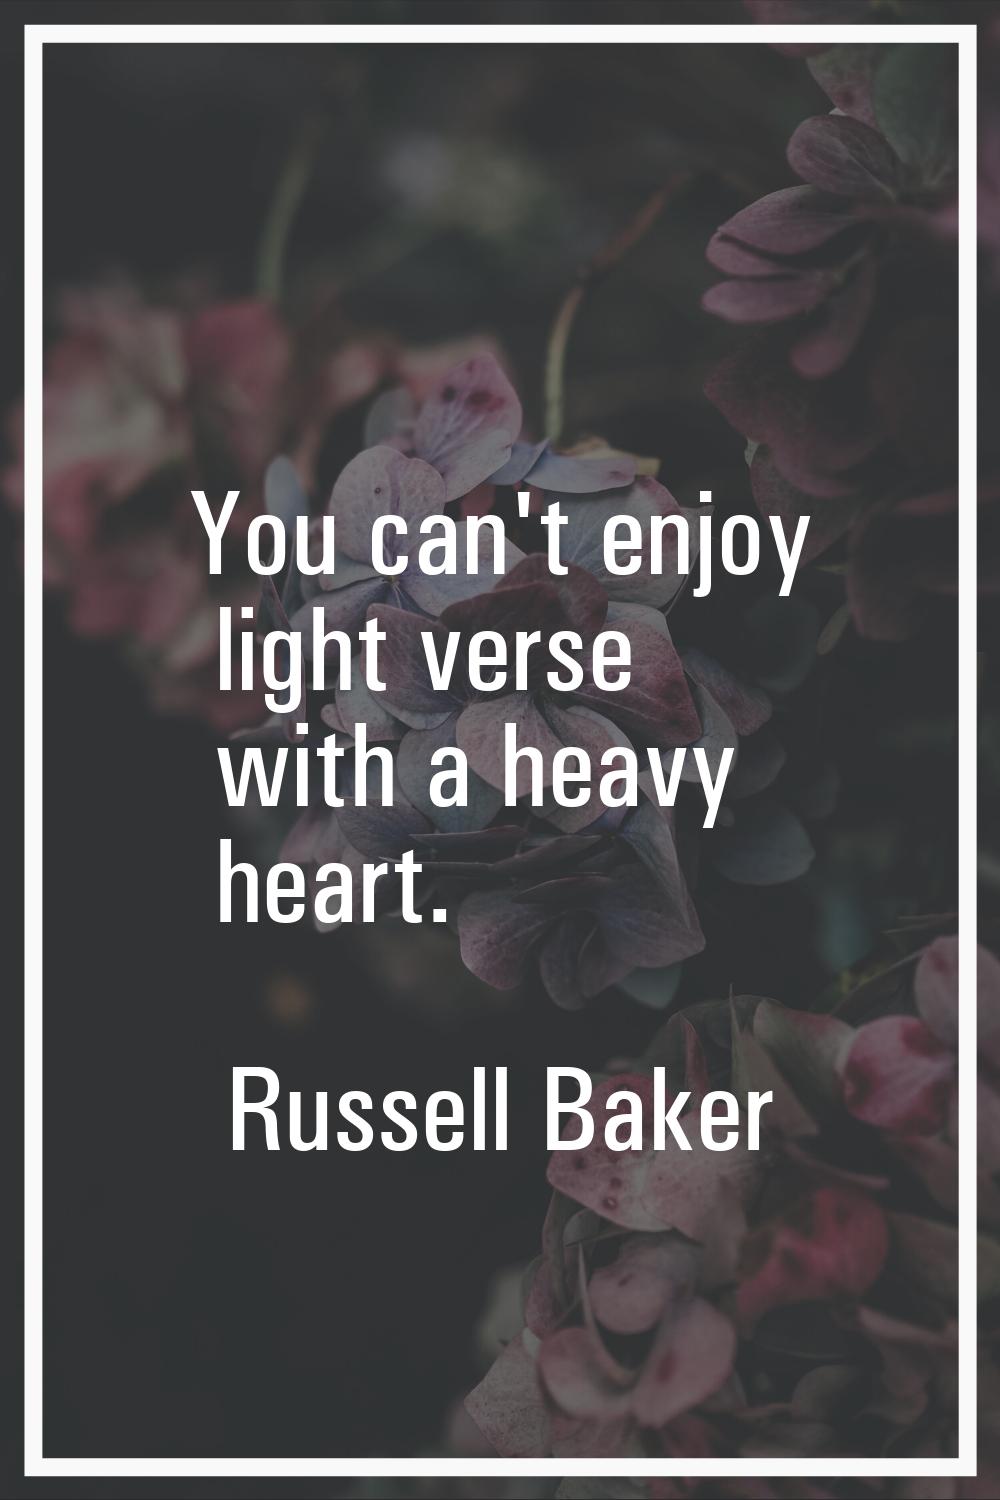 You can't enjoy light verse with a heavy heart.